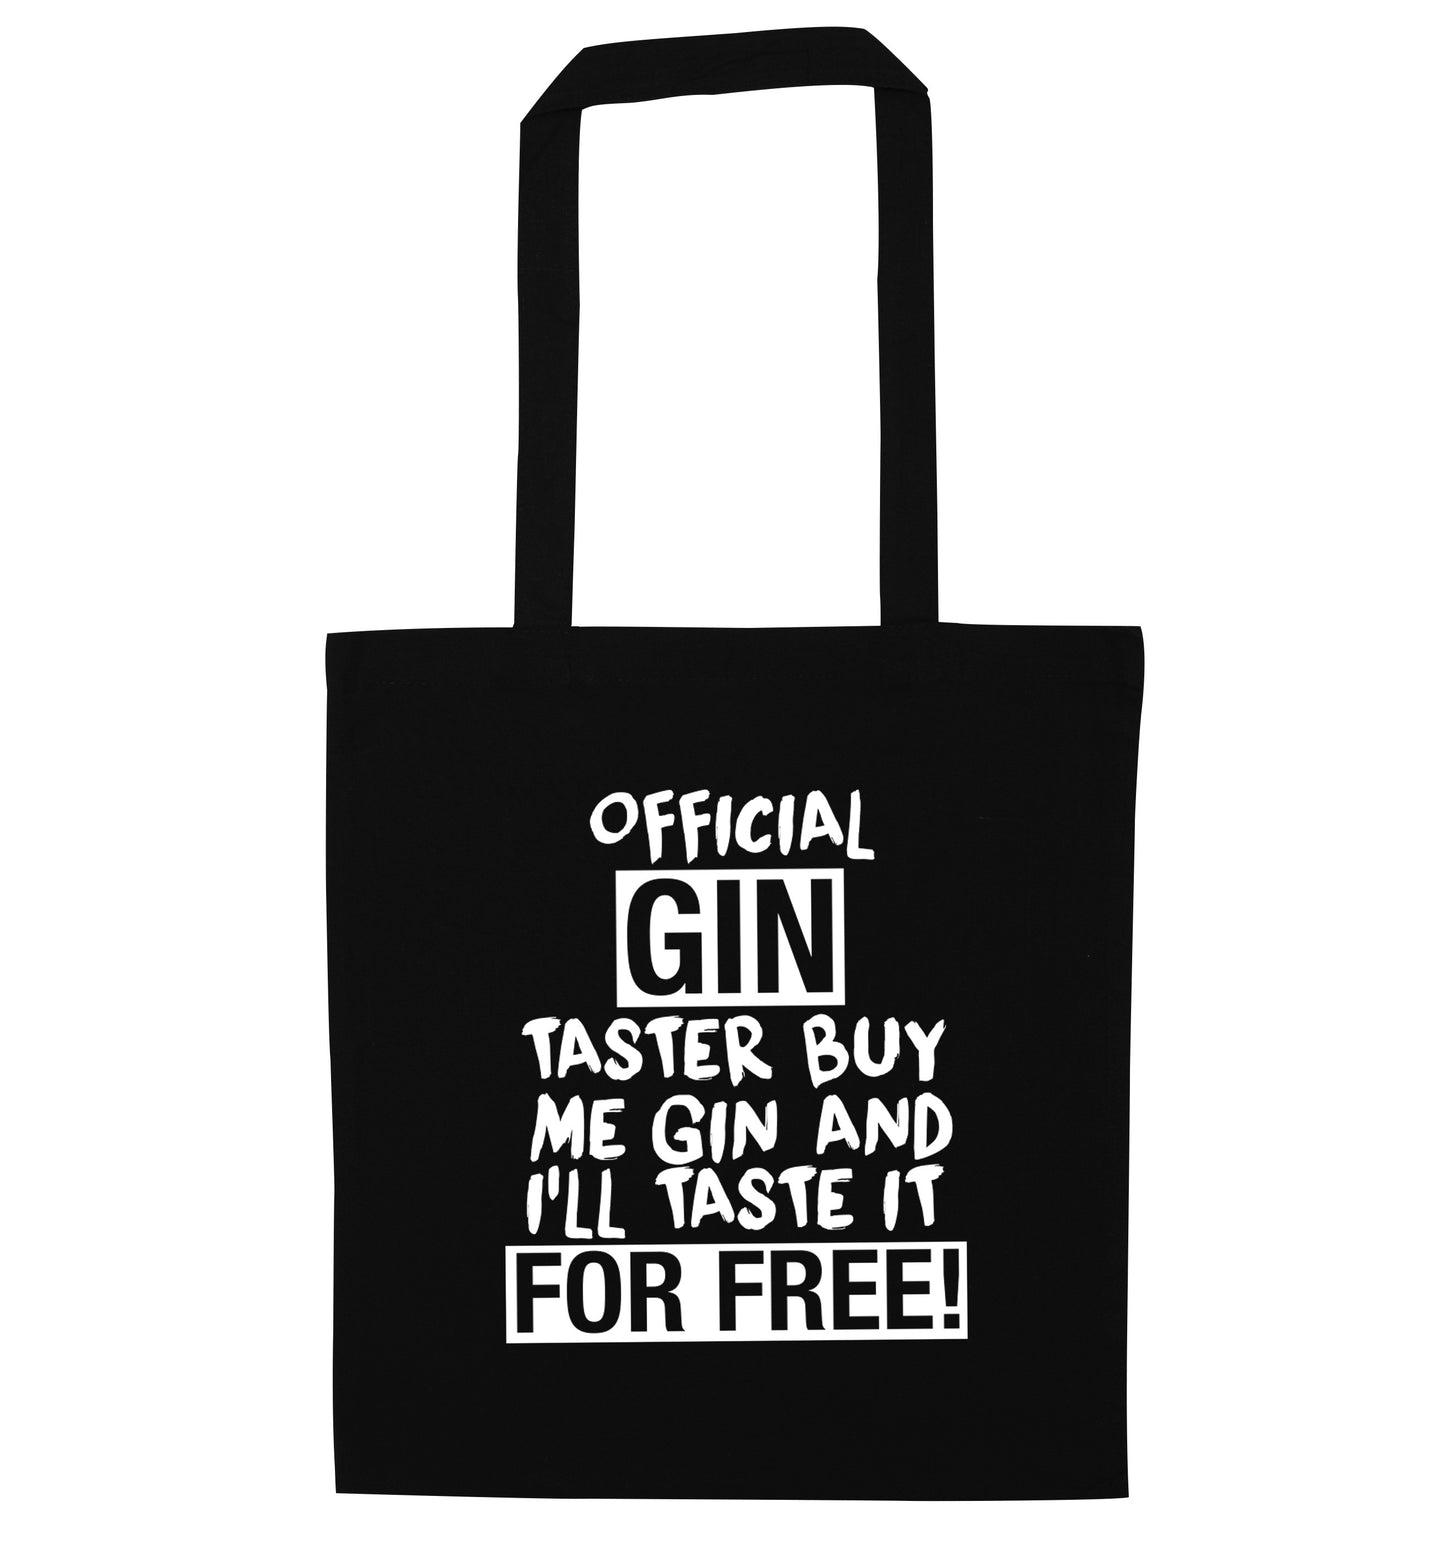 Official gin taster buy me gin and I'll taste it for free black tote bag